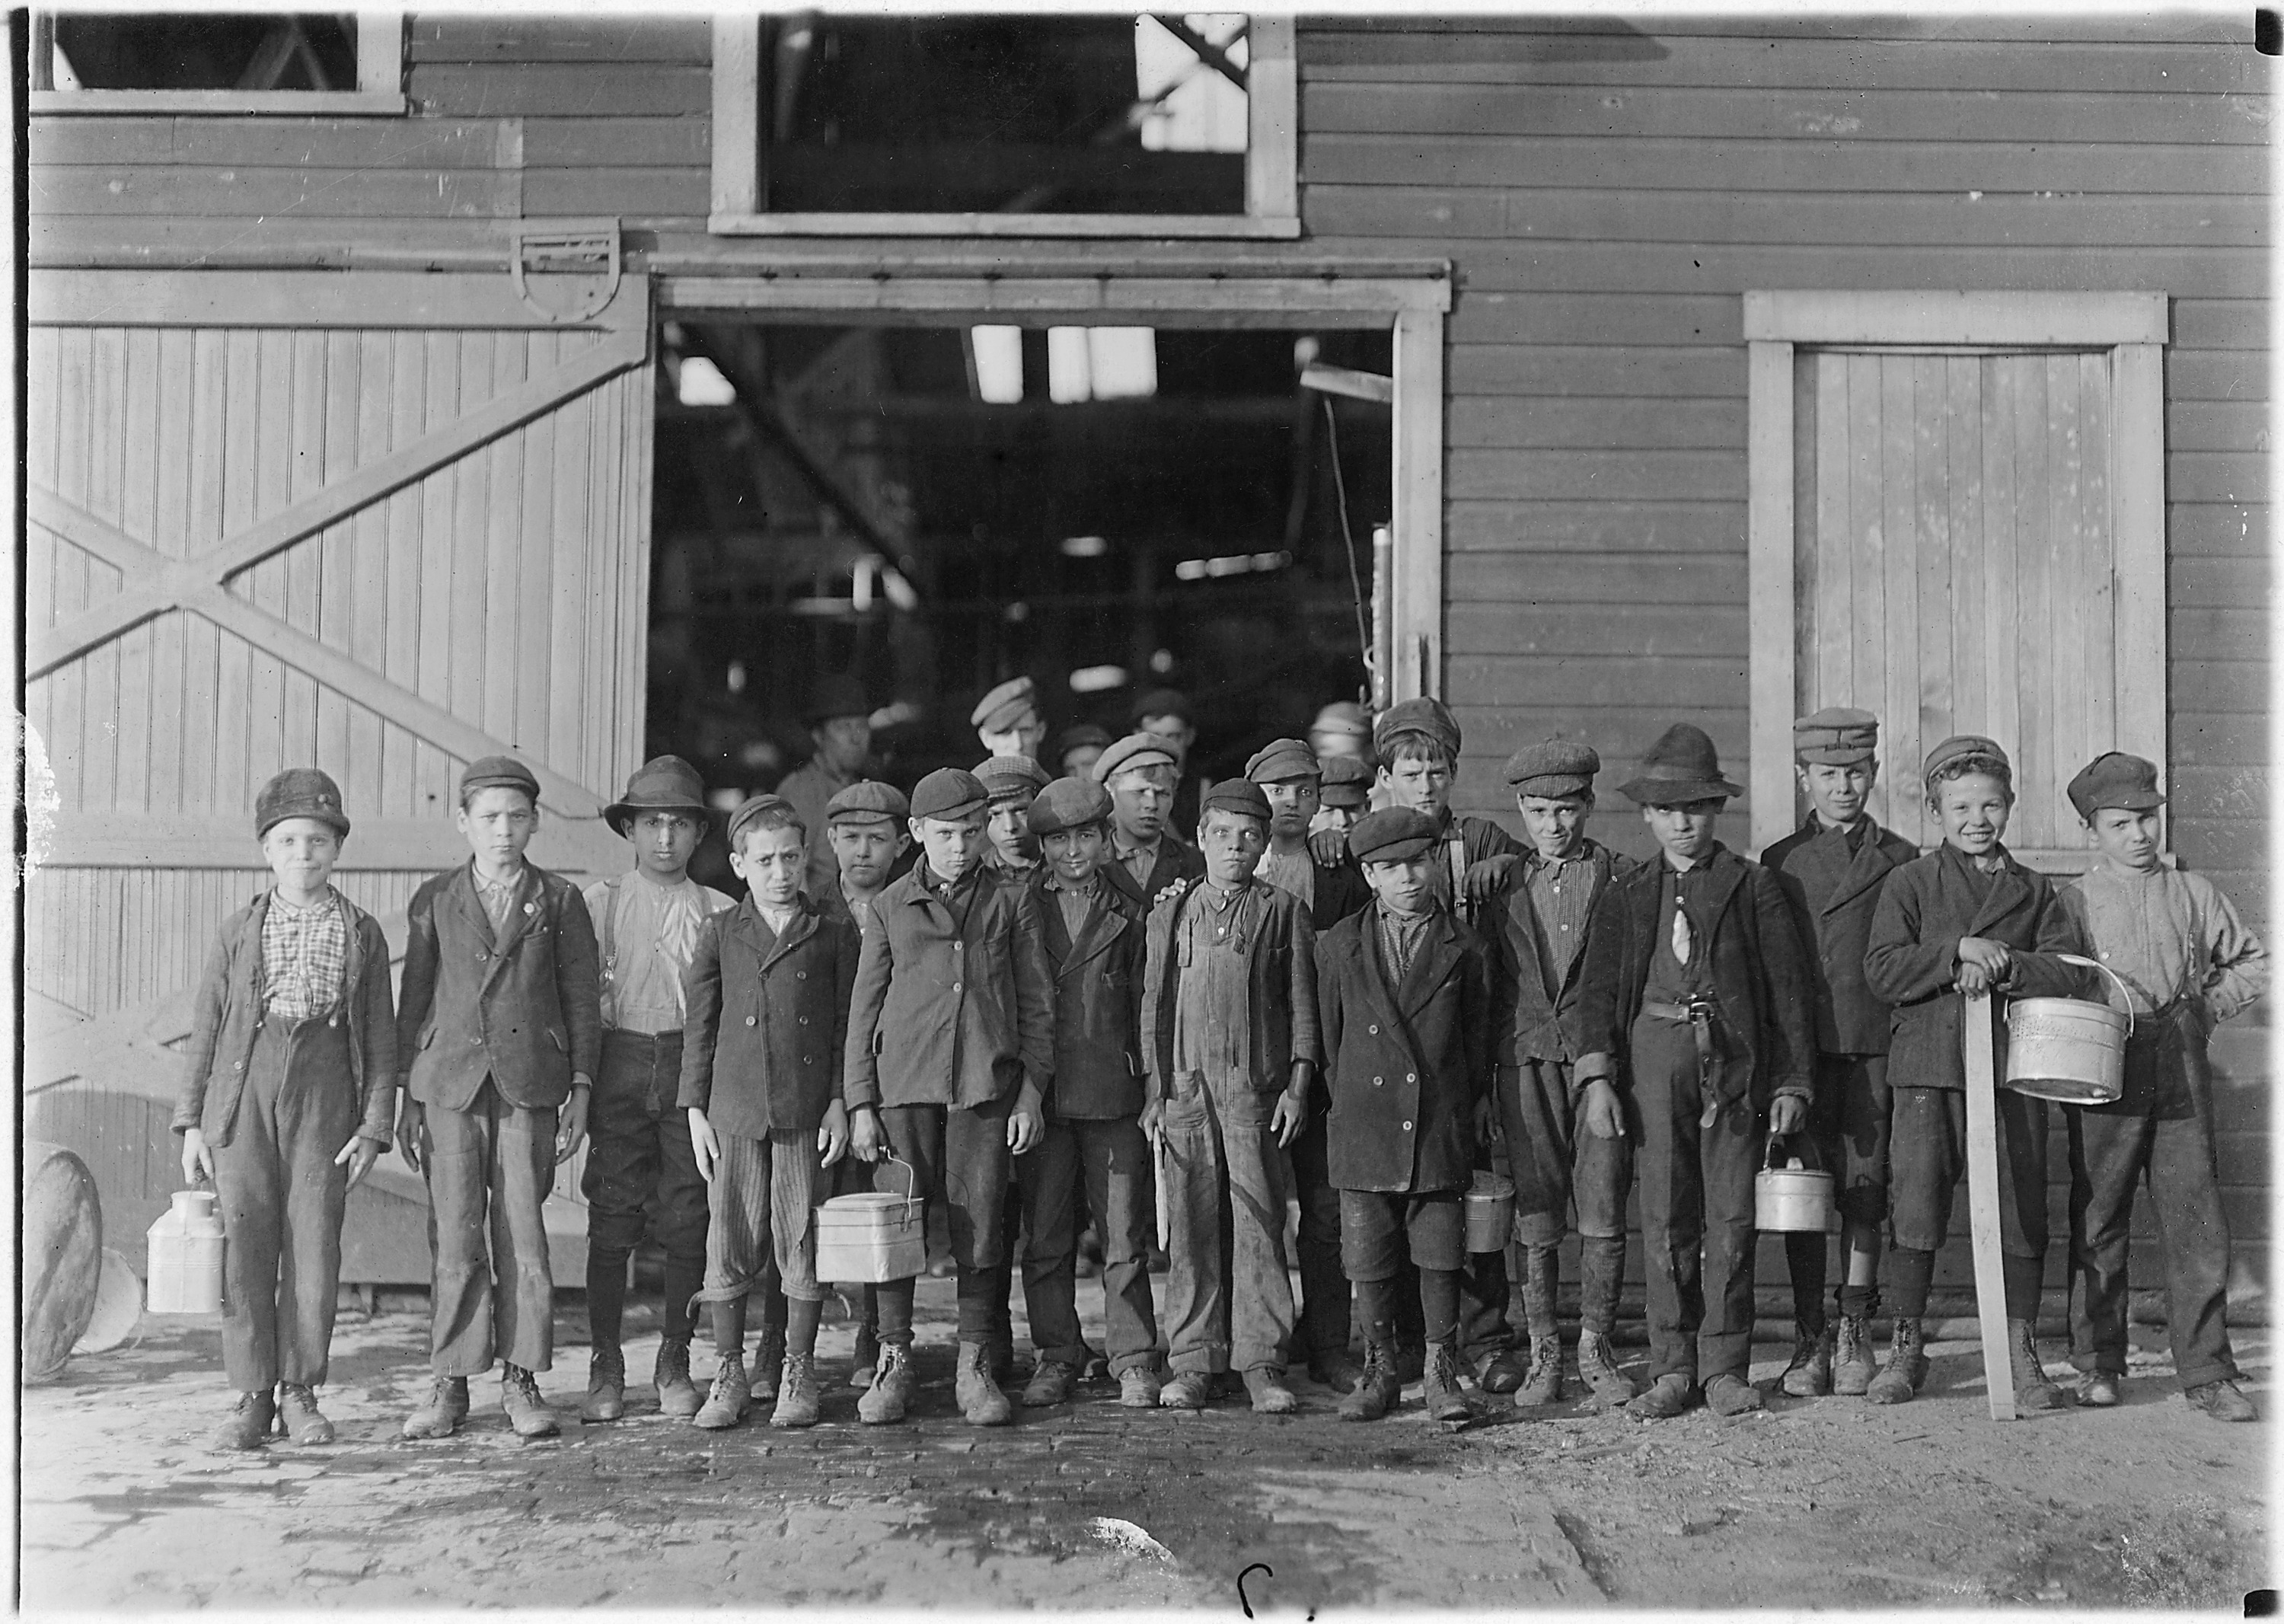 5 pm. Boys going home from Monougal Glass Works. A native remark, 